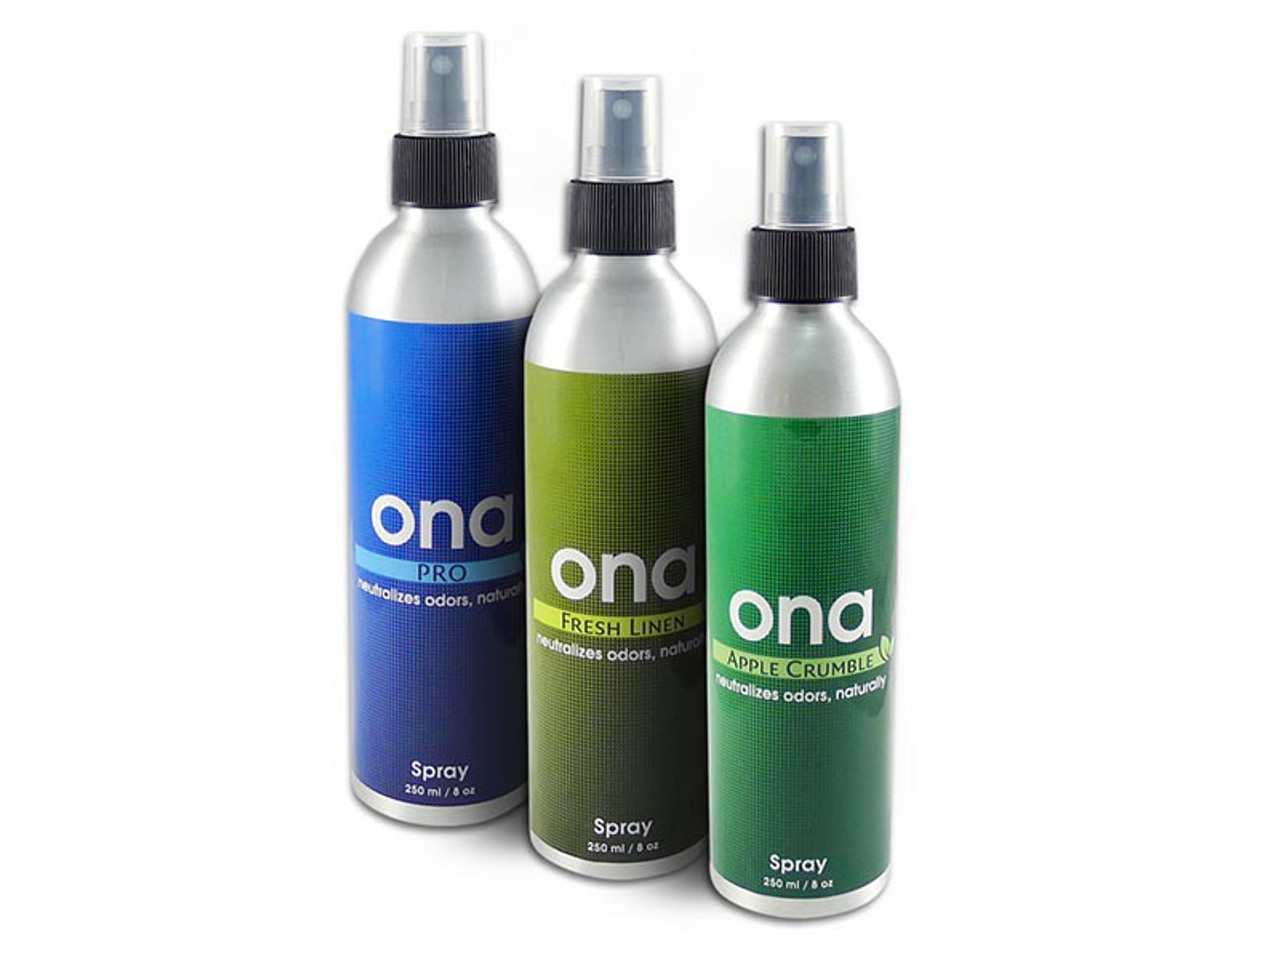 Once the ONA spray is used the ONA particles disperse in the air and when they come into contact with odourous molecules they render them null and inert, removing the odour from the air and leaving a fresh scent.

ONA is environmentally friendly, non toxic and organic oil based with the oils extracted from flowers.